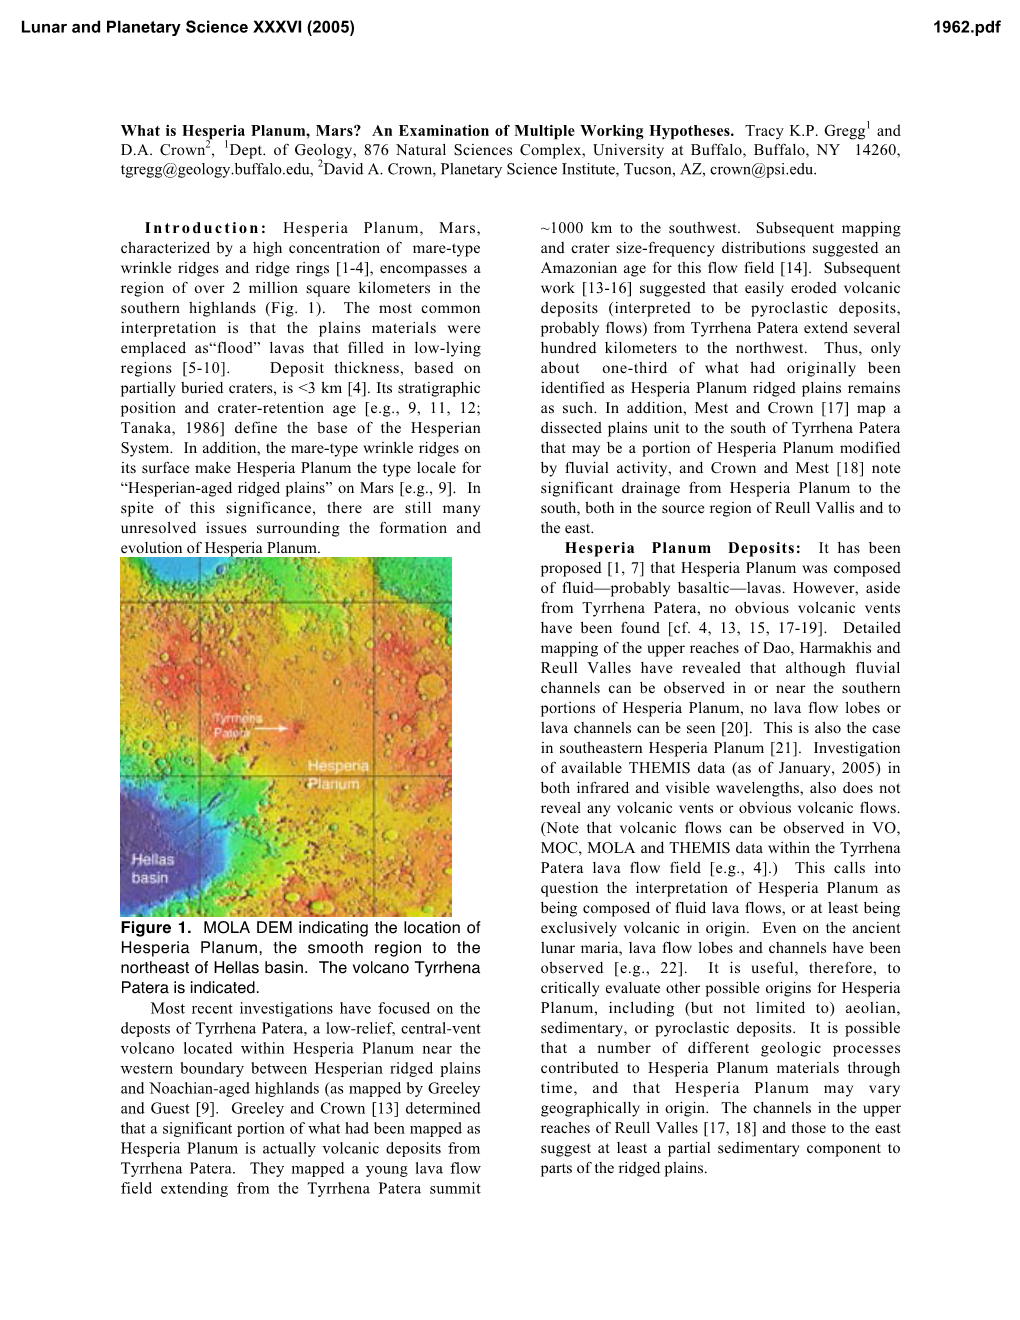 What Is Hesperia Planum, Mars? an Examination of Multiple Working Hypotheses